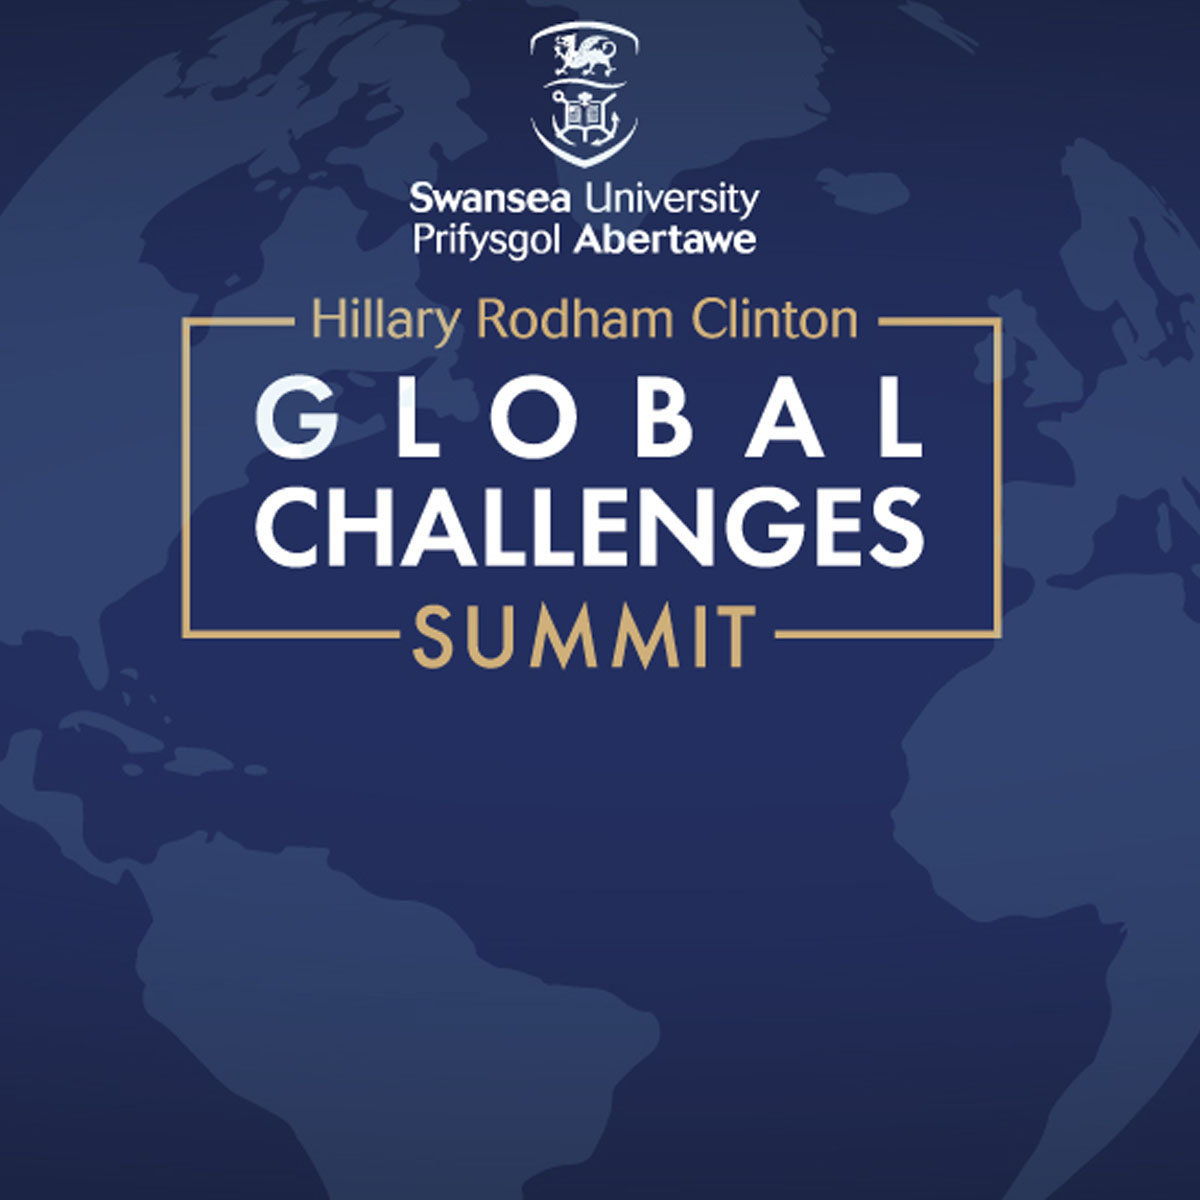 The Global Challenges Summit branding